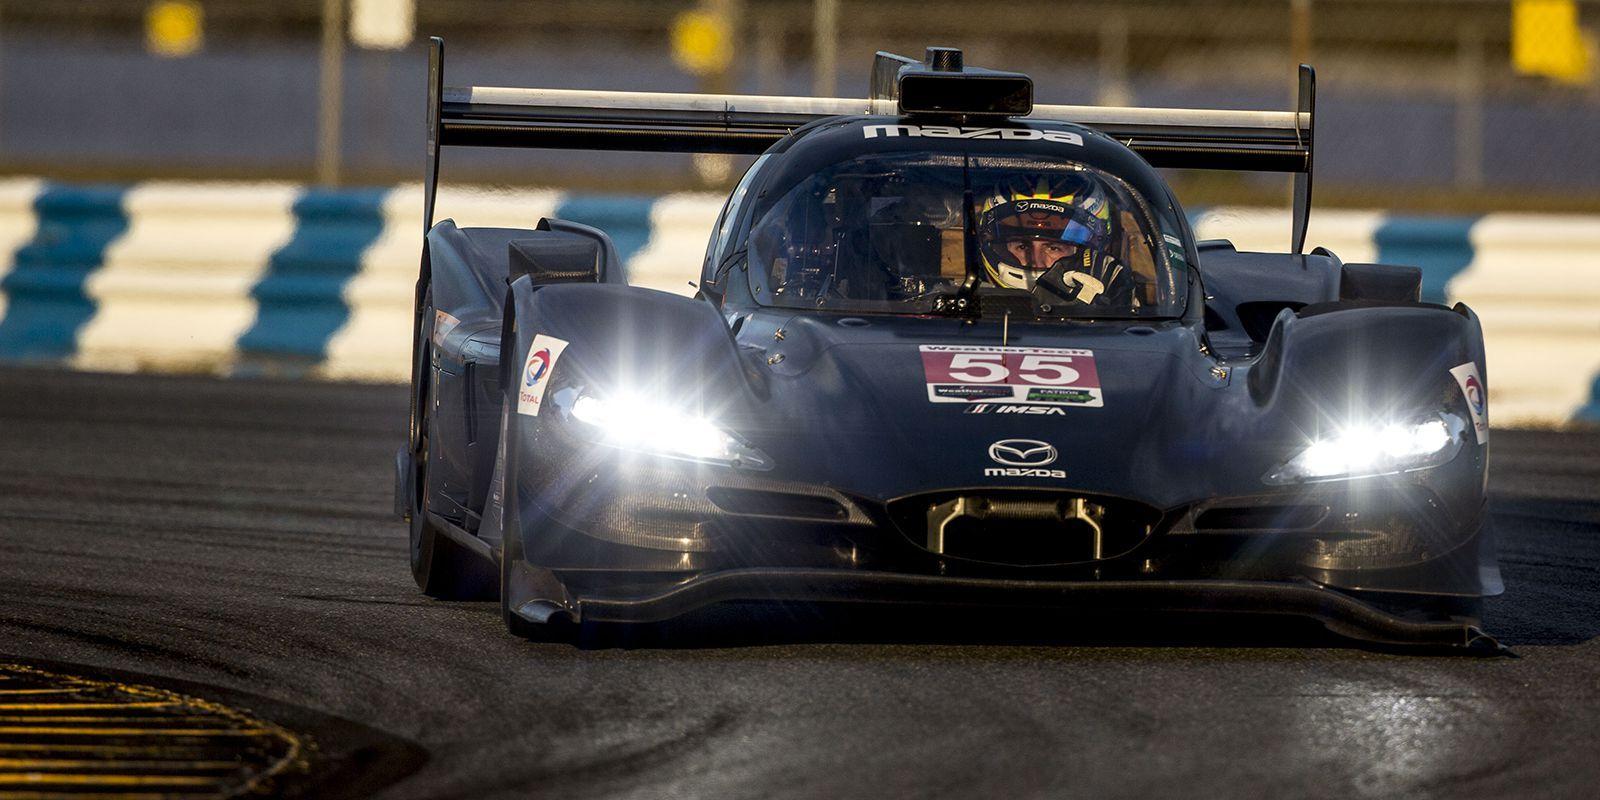 A Tour of Mazda's New Daytona Prototype Race Car From James Hinchcliffe